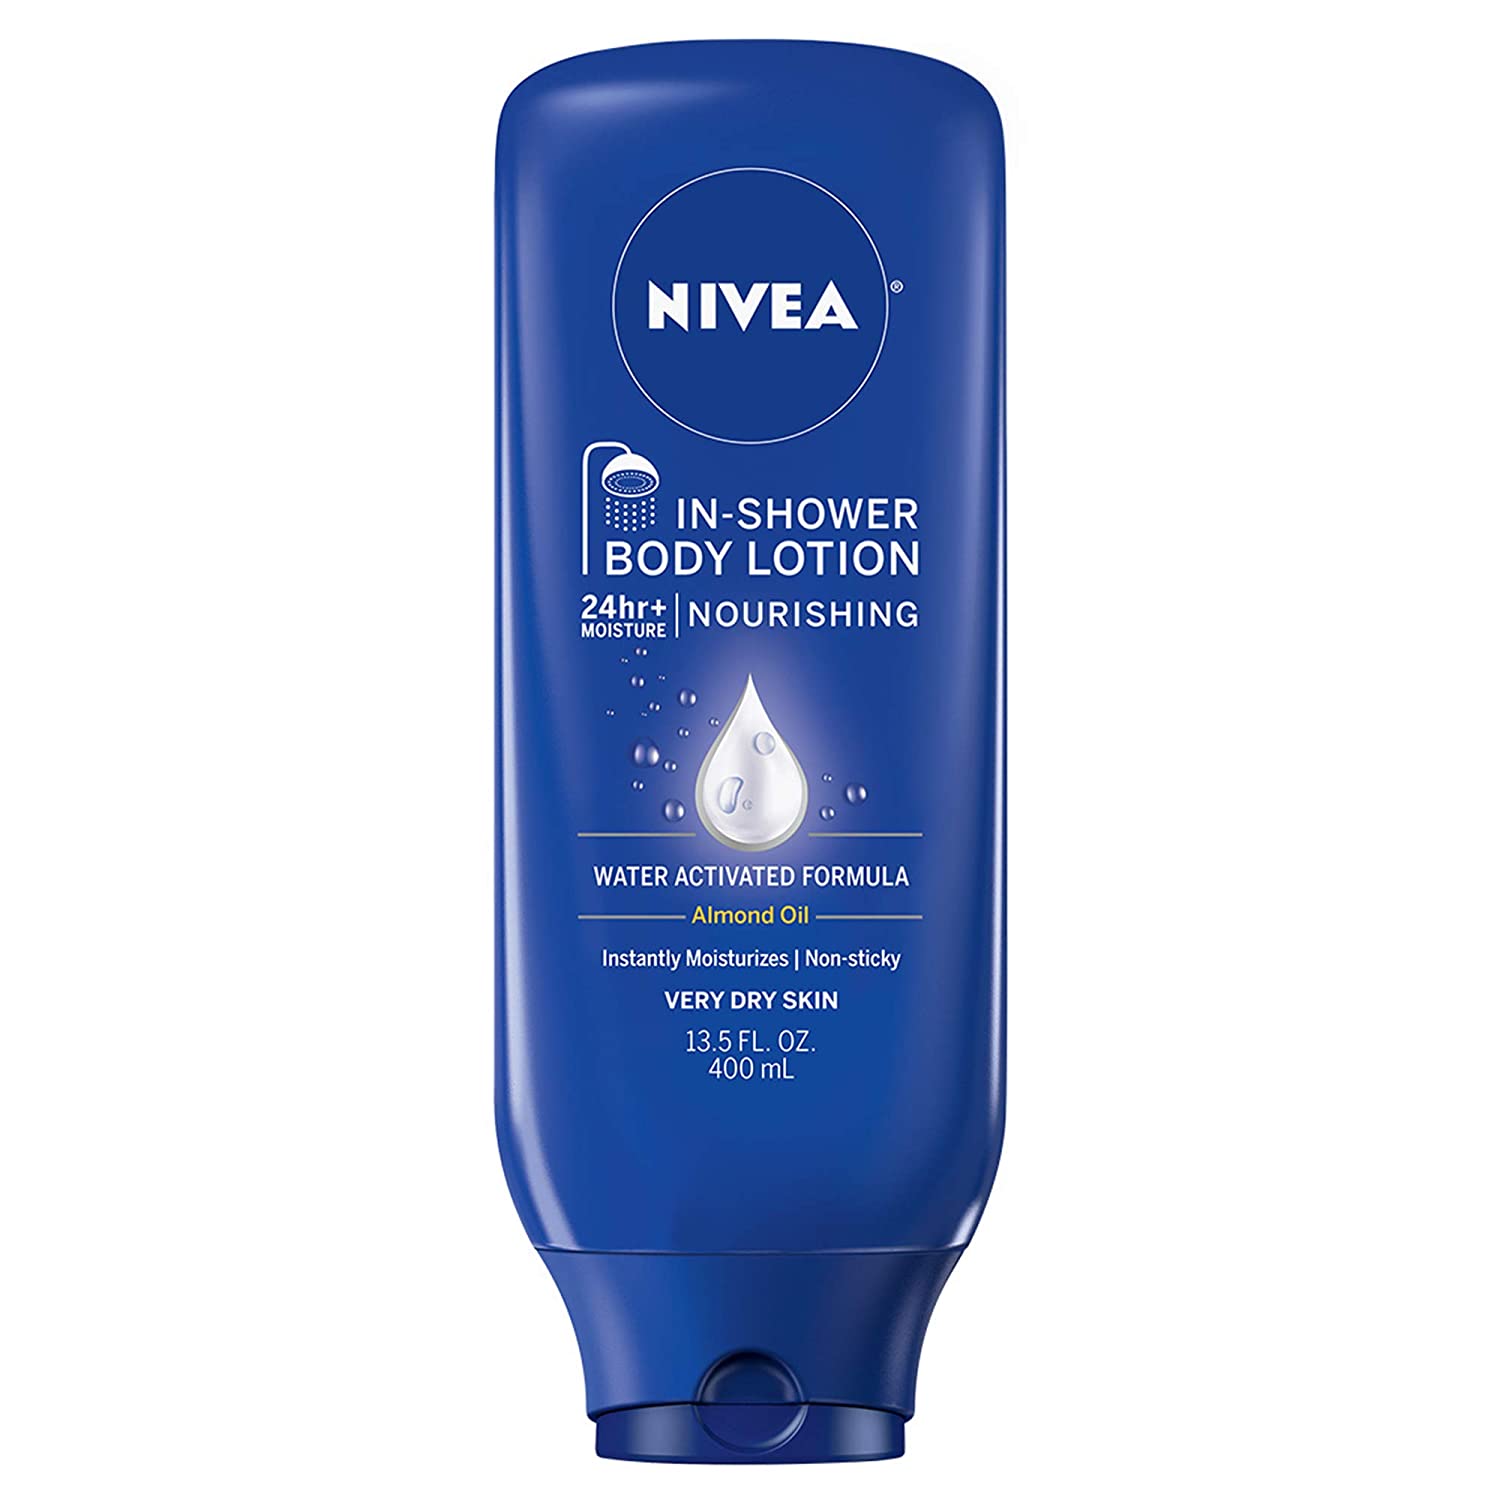 13.5-Oz Nivea Nourishing In-Shower Body Lotion (Almond Oil or Cocoa Butter) $3.55 w/ S&S + Free Shipping w/ Prime or on $25+